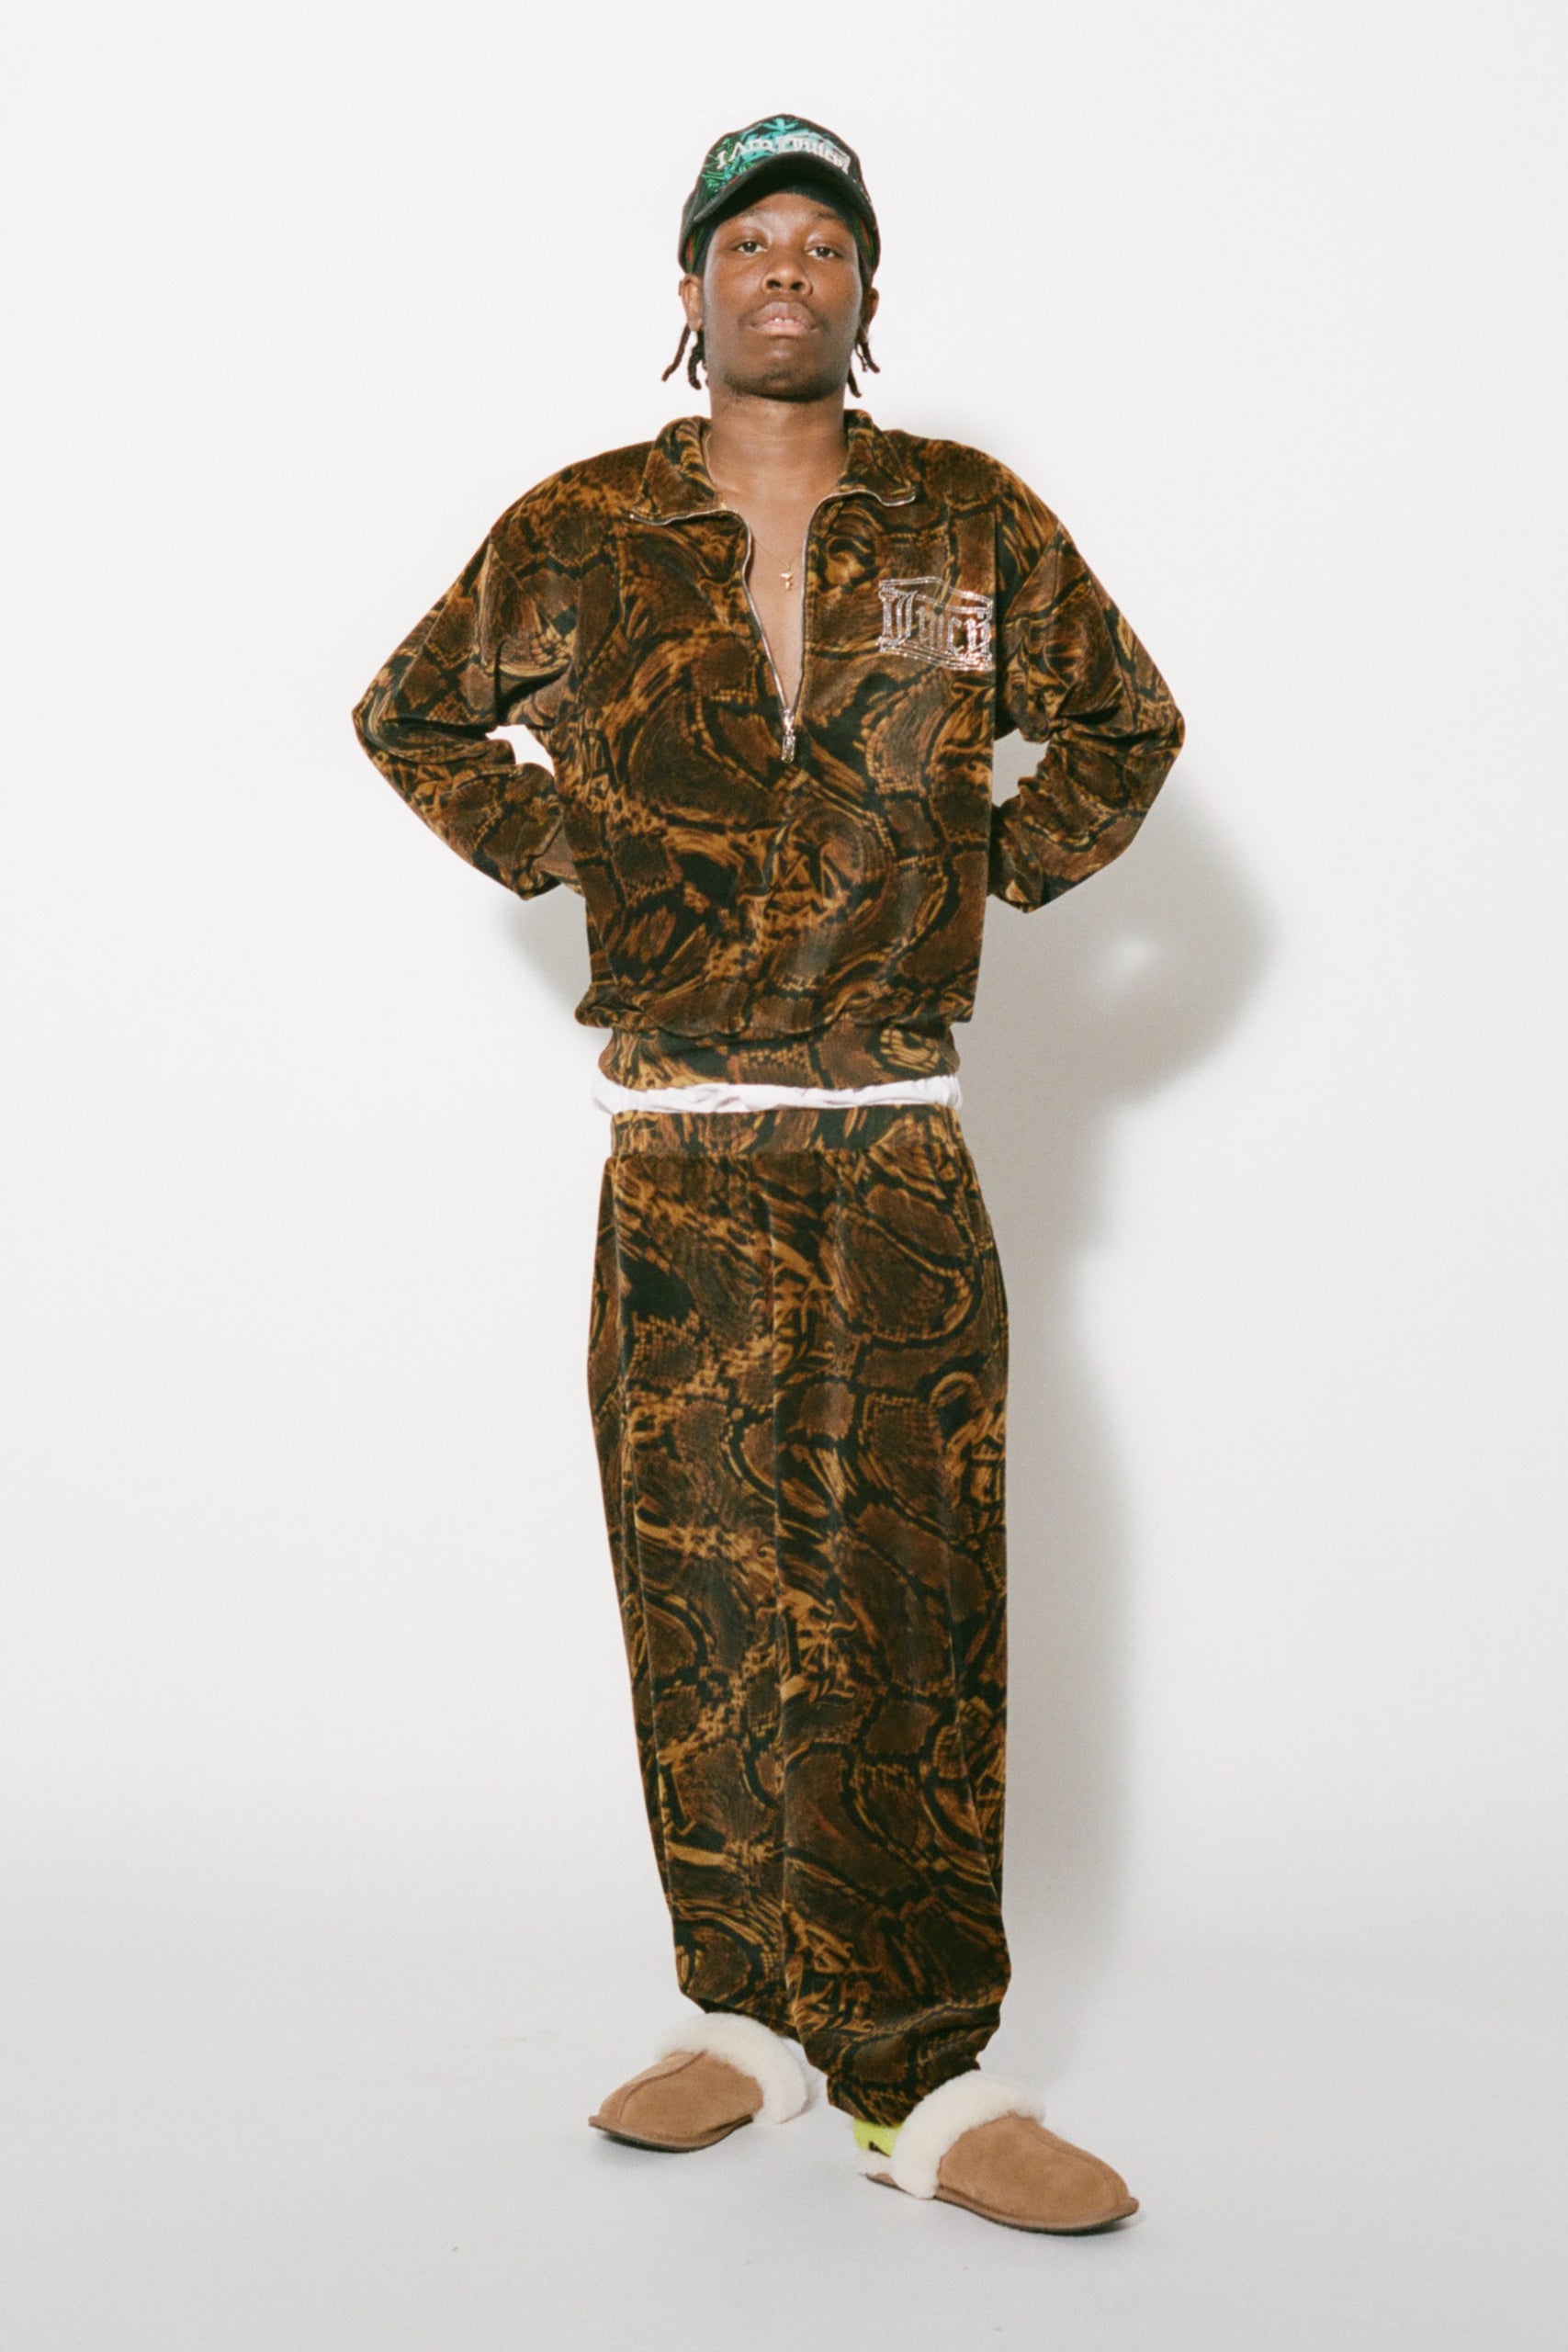 Load image into Gallery viewer, Aries x Juicy Couture Psysnake Unisex Sweatpant